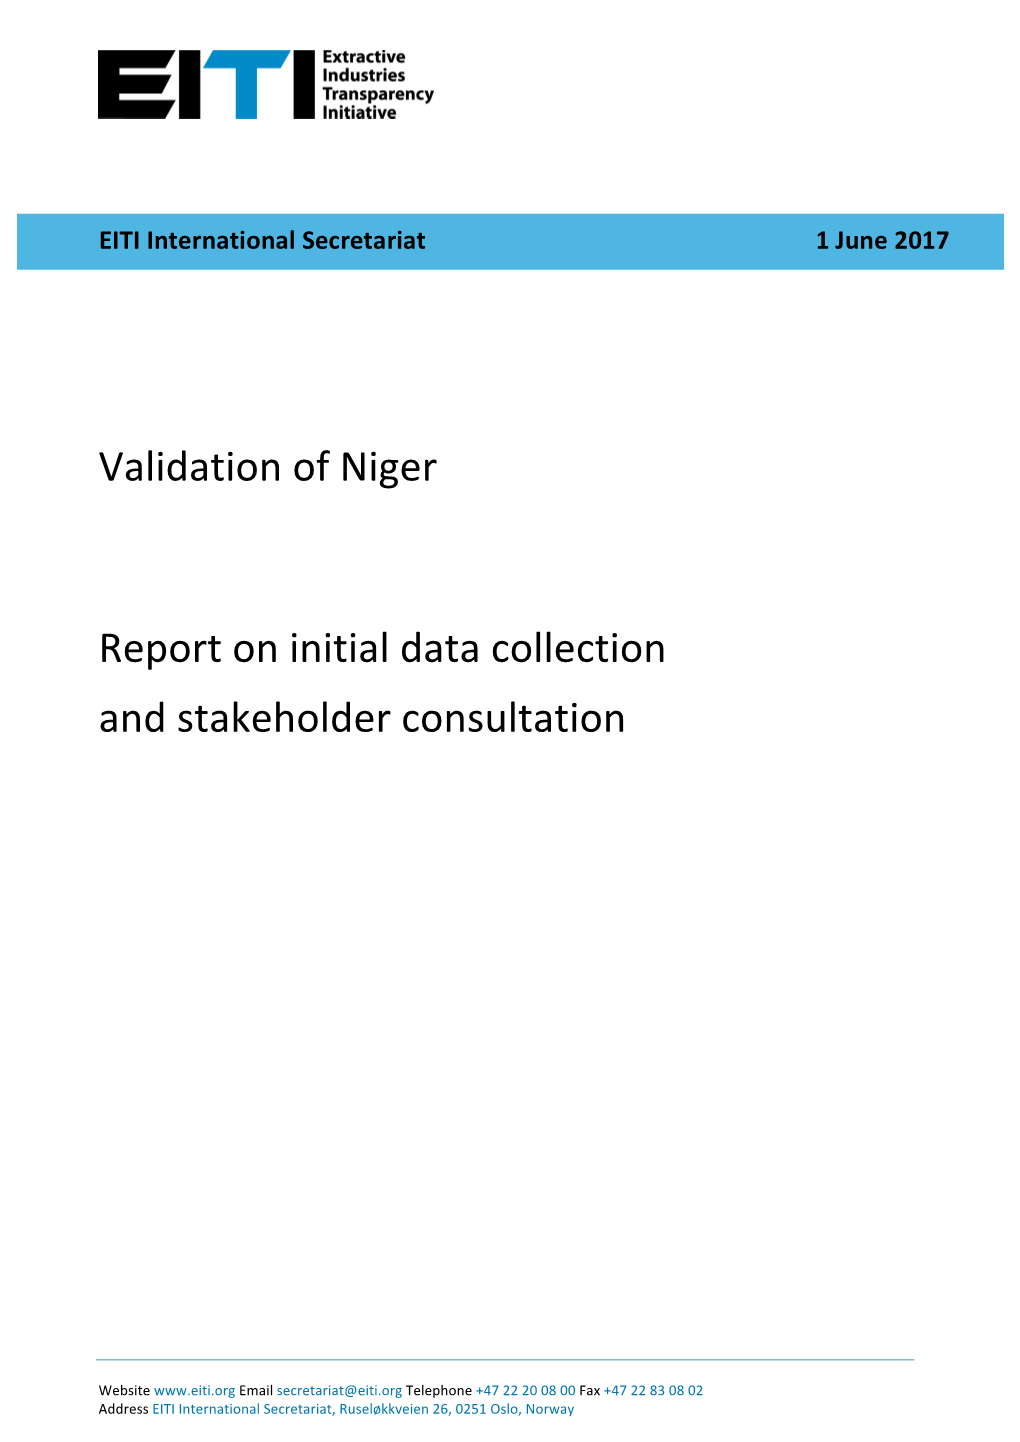 Validation of Niger Report on Initial Data Collection and Stakeholder Consultation